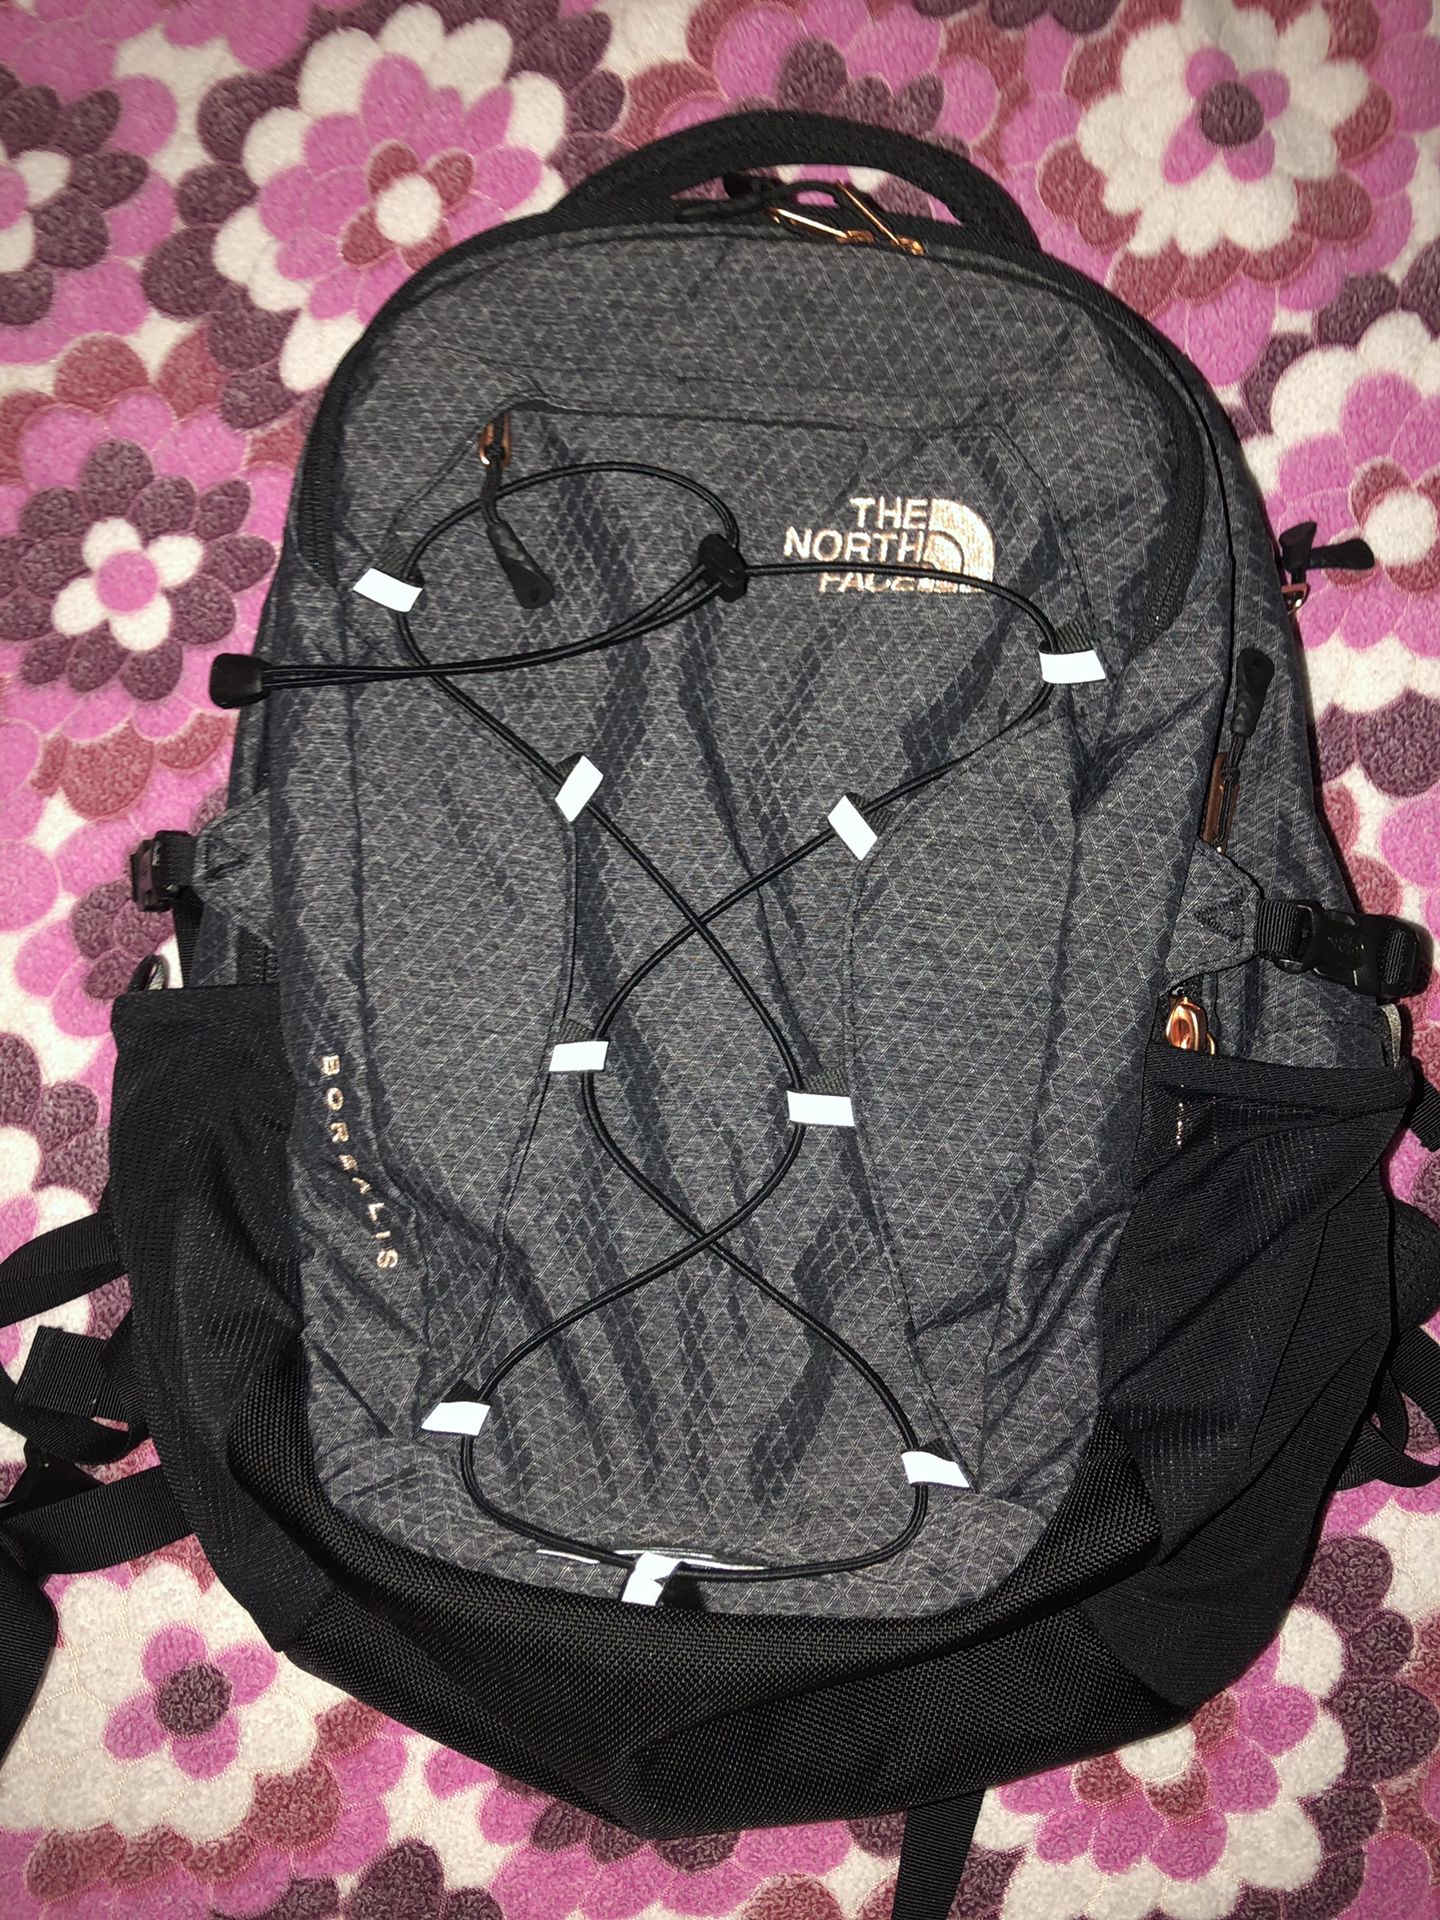 The North Face Borealis backpack